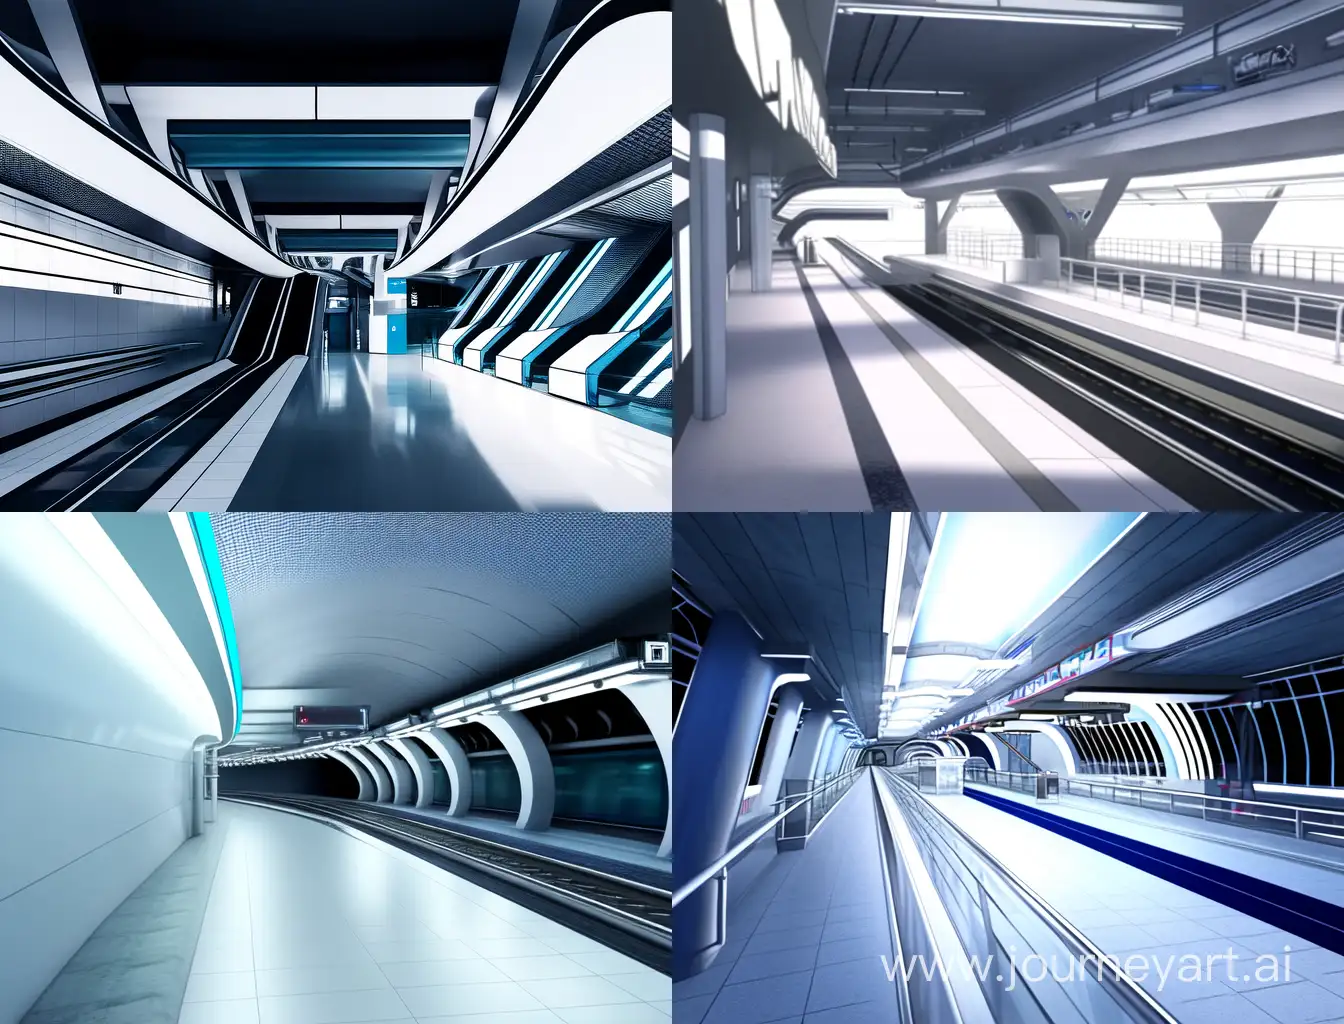 Futuristic-Zaha-HadidInspired-Metro-Station-with-Visible-Rails-and-Arriving-Train